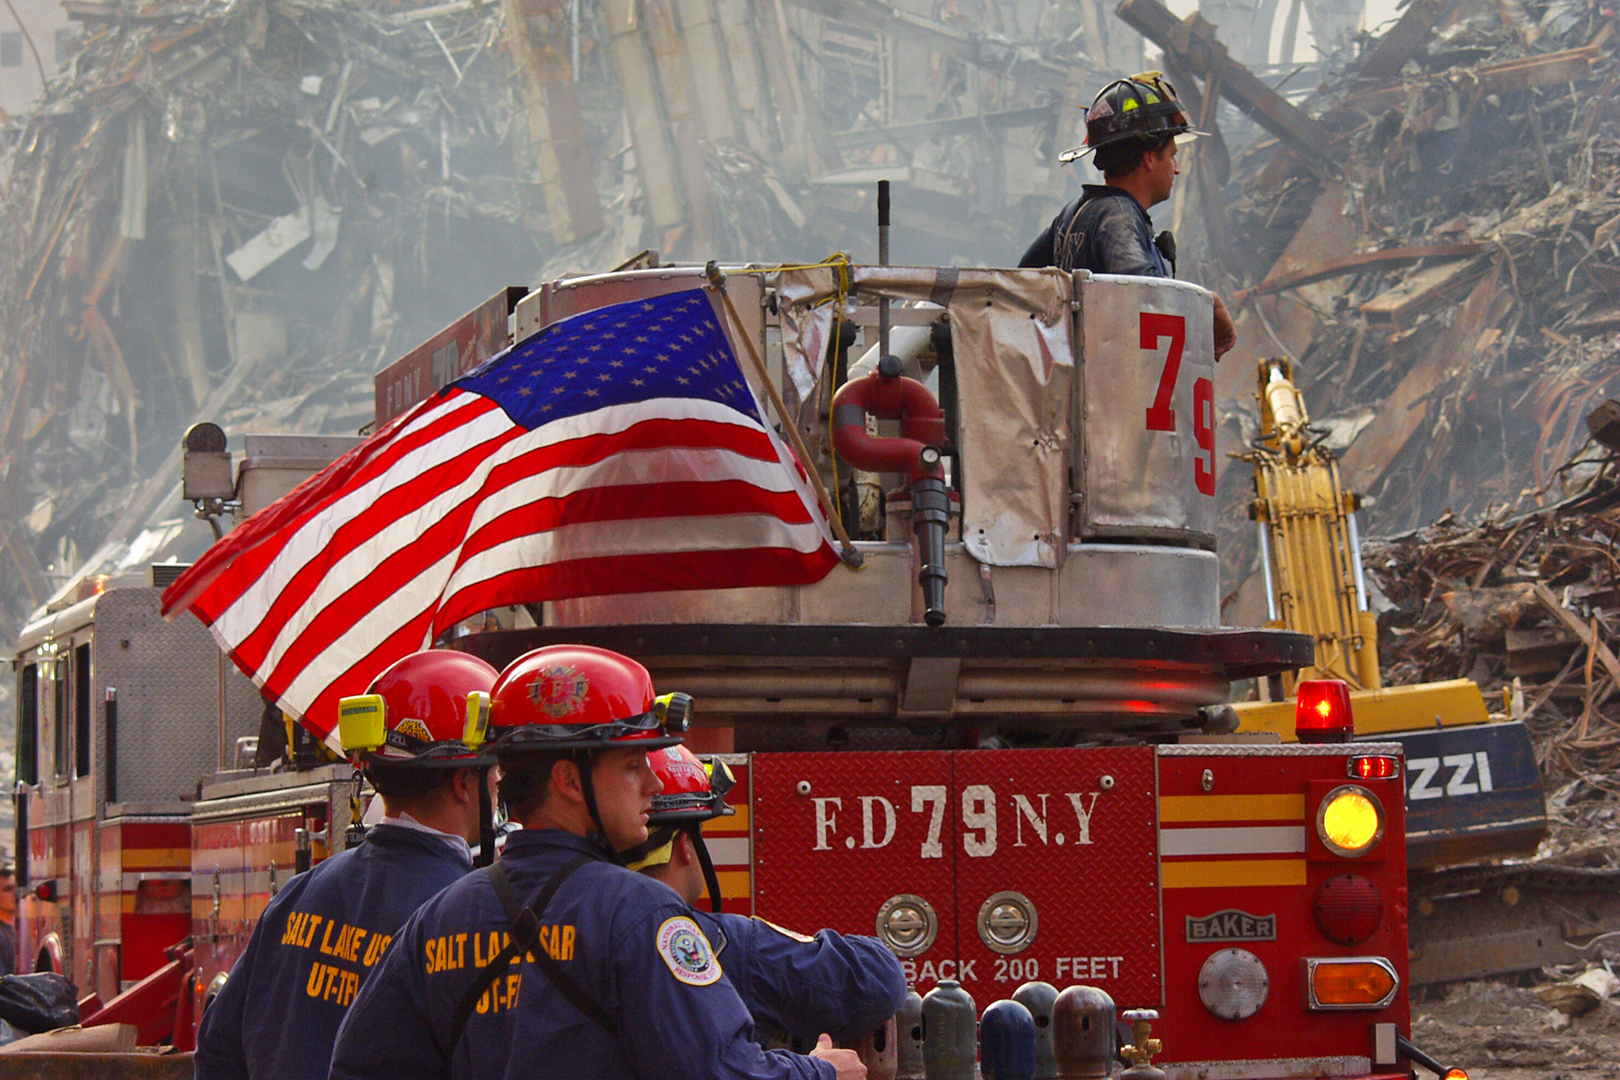 Firefighters on 9/11 with USA flag waiving on the back of the fire truck